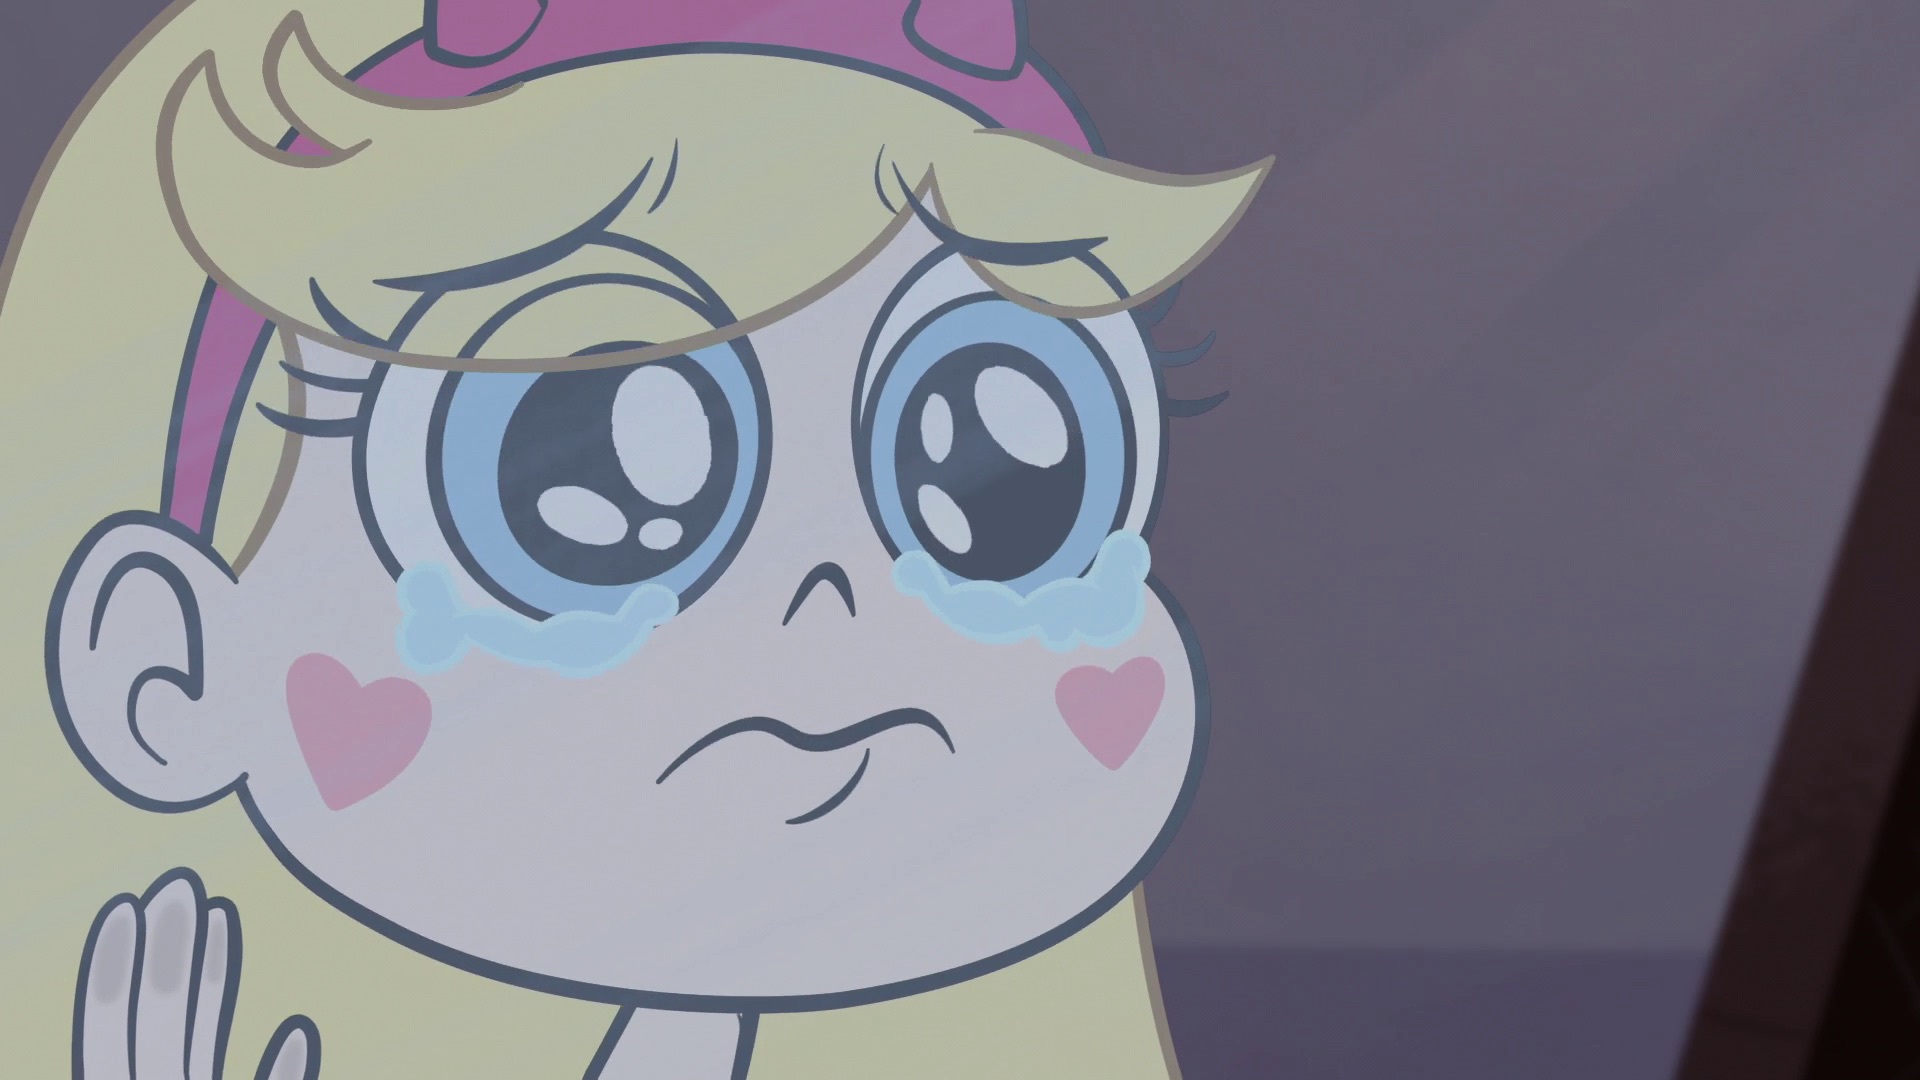 Star vs the forces of evil rewritte.